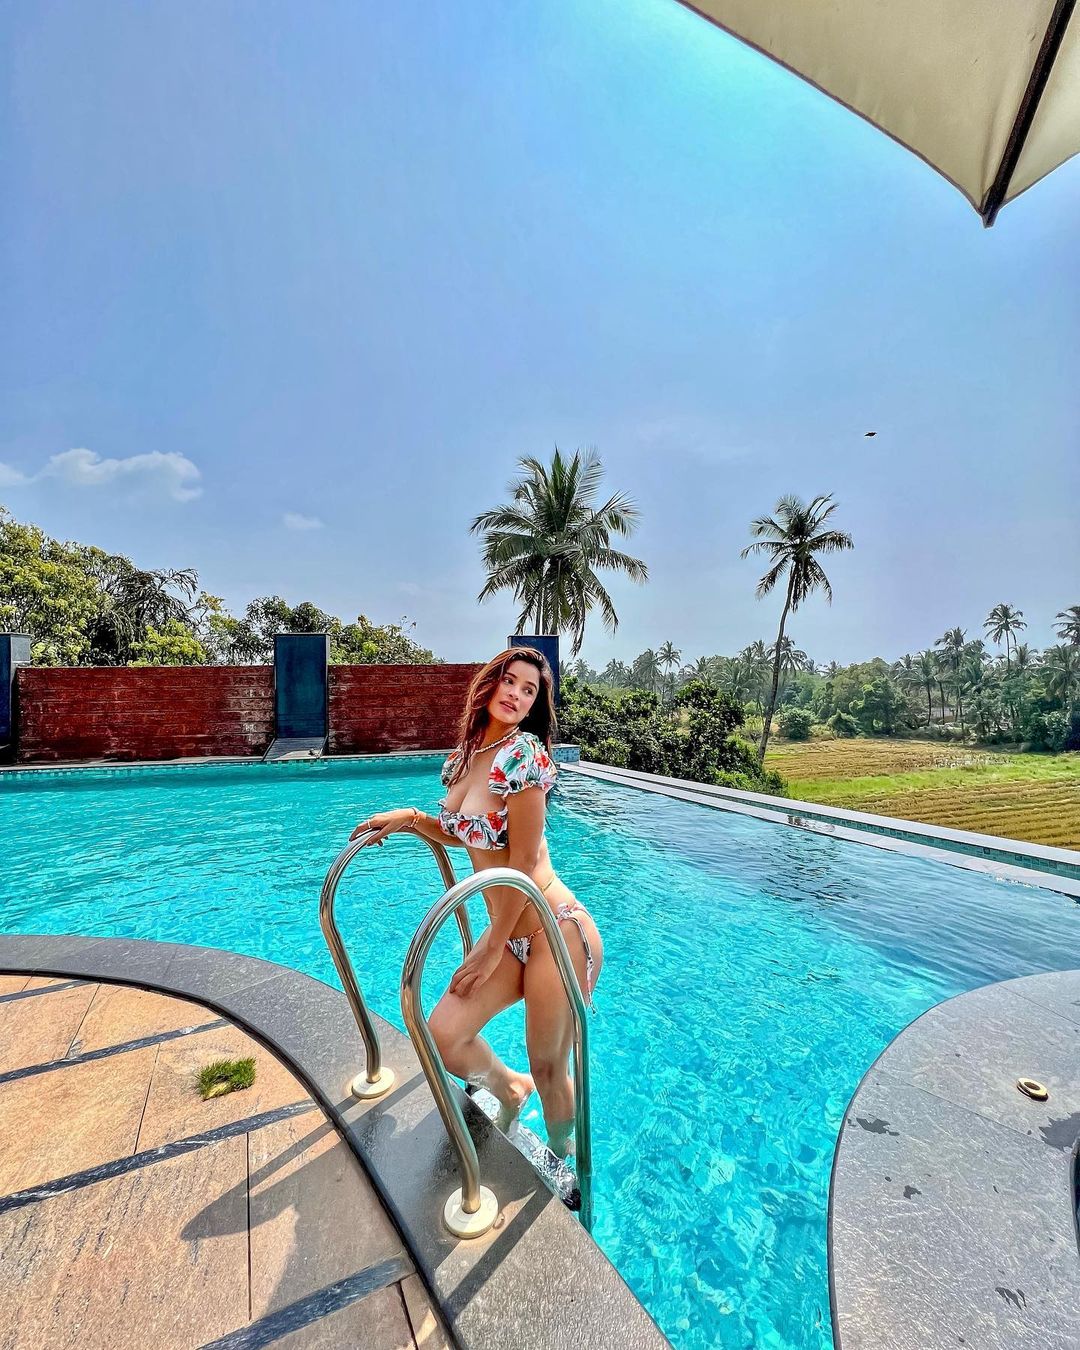 Chetna Pande strikes a seductive pose in the sexy two-piece